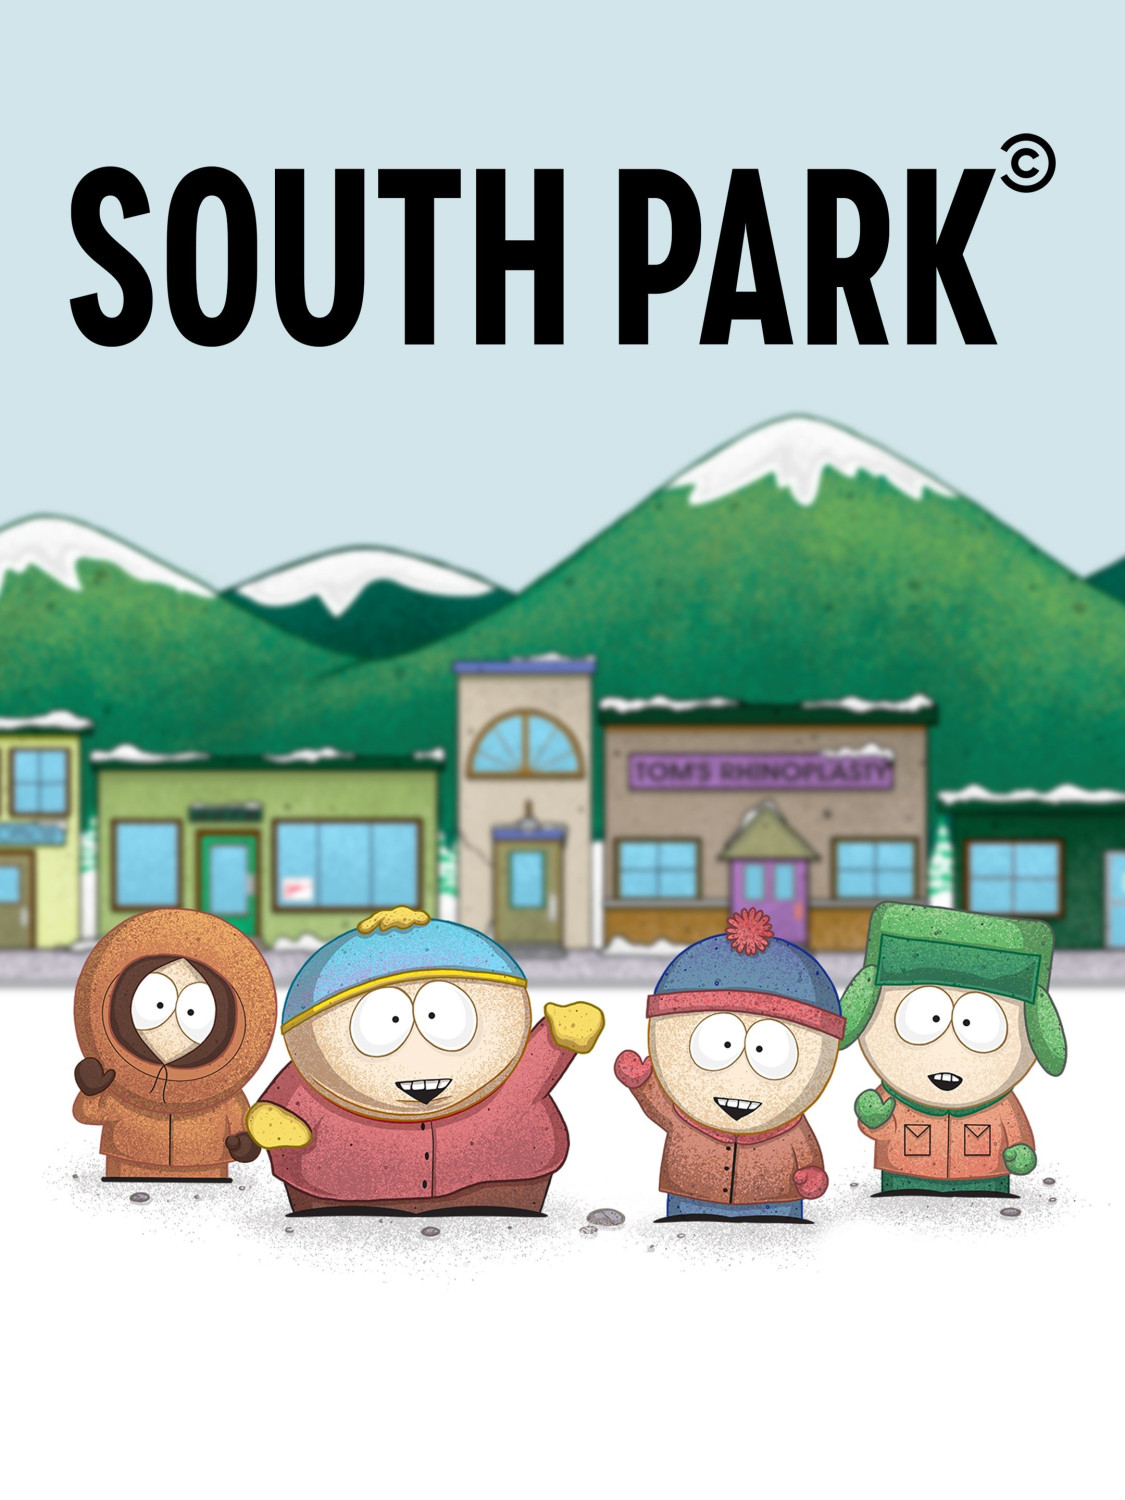 Personality Test: Which South Park Character Are You?